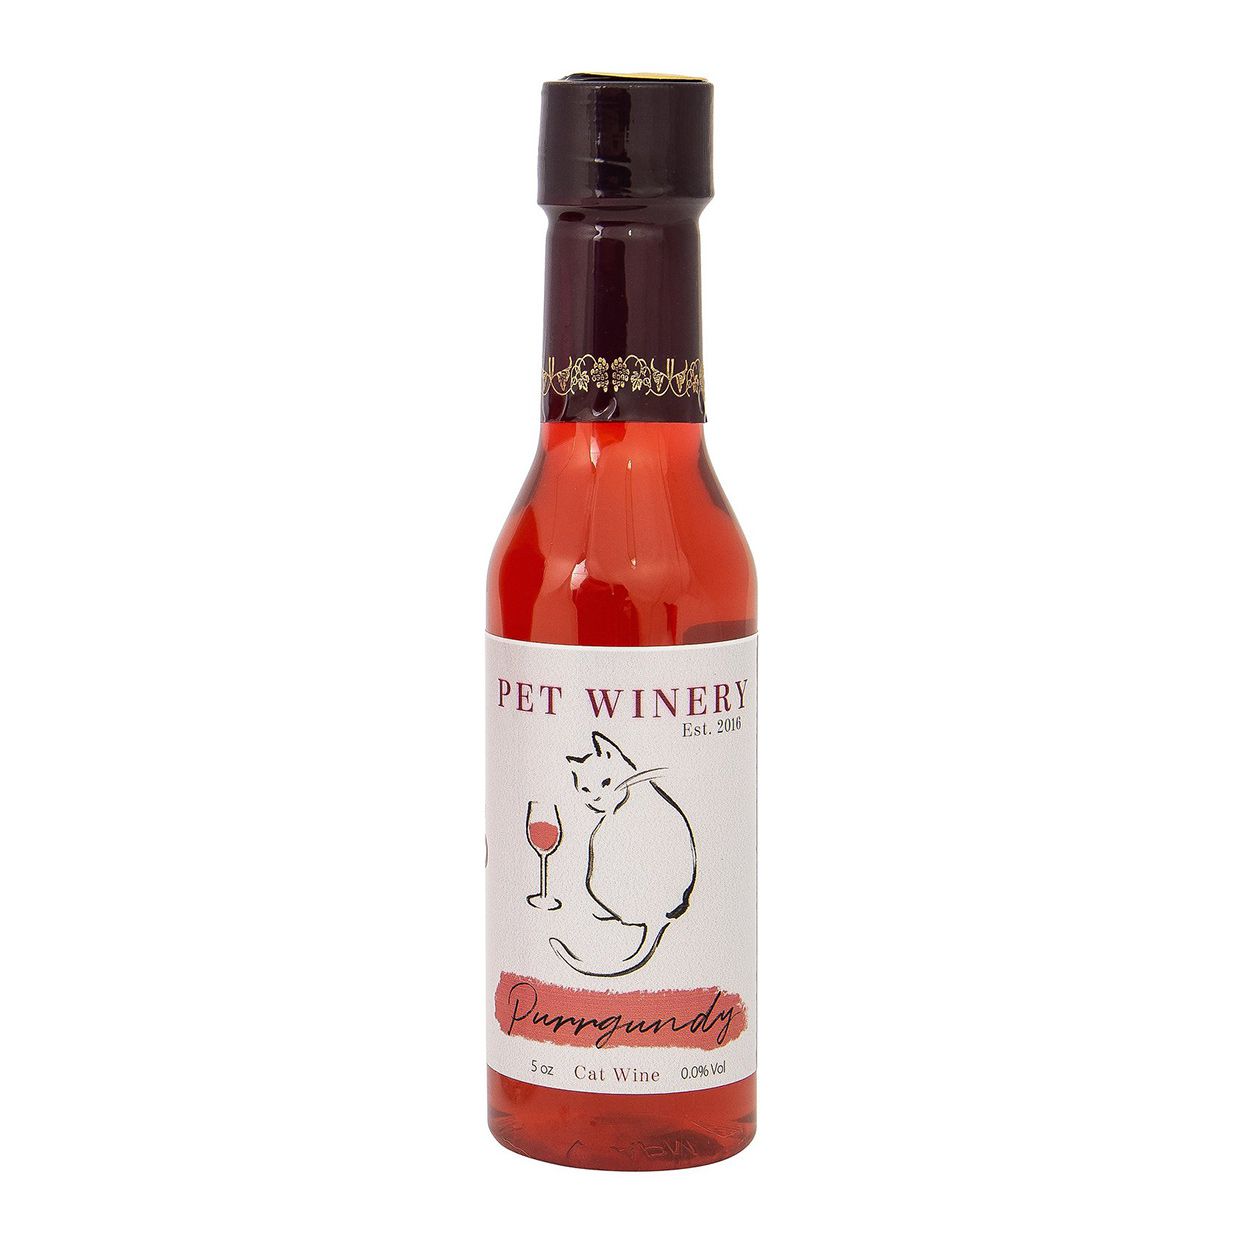 Product photo of a bottle of Pet Winery Wine Purrgundy Cat Lickable Treat on a white background